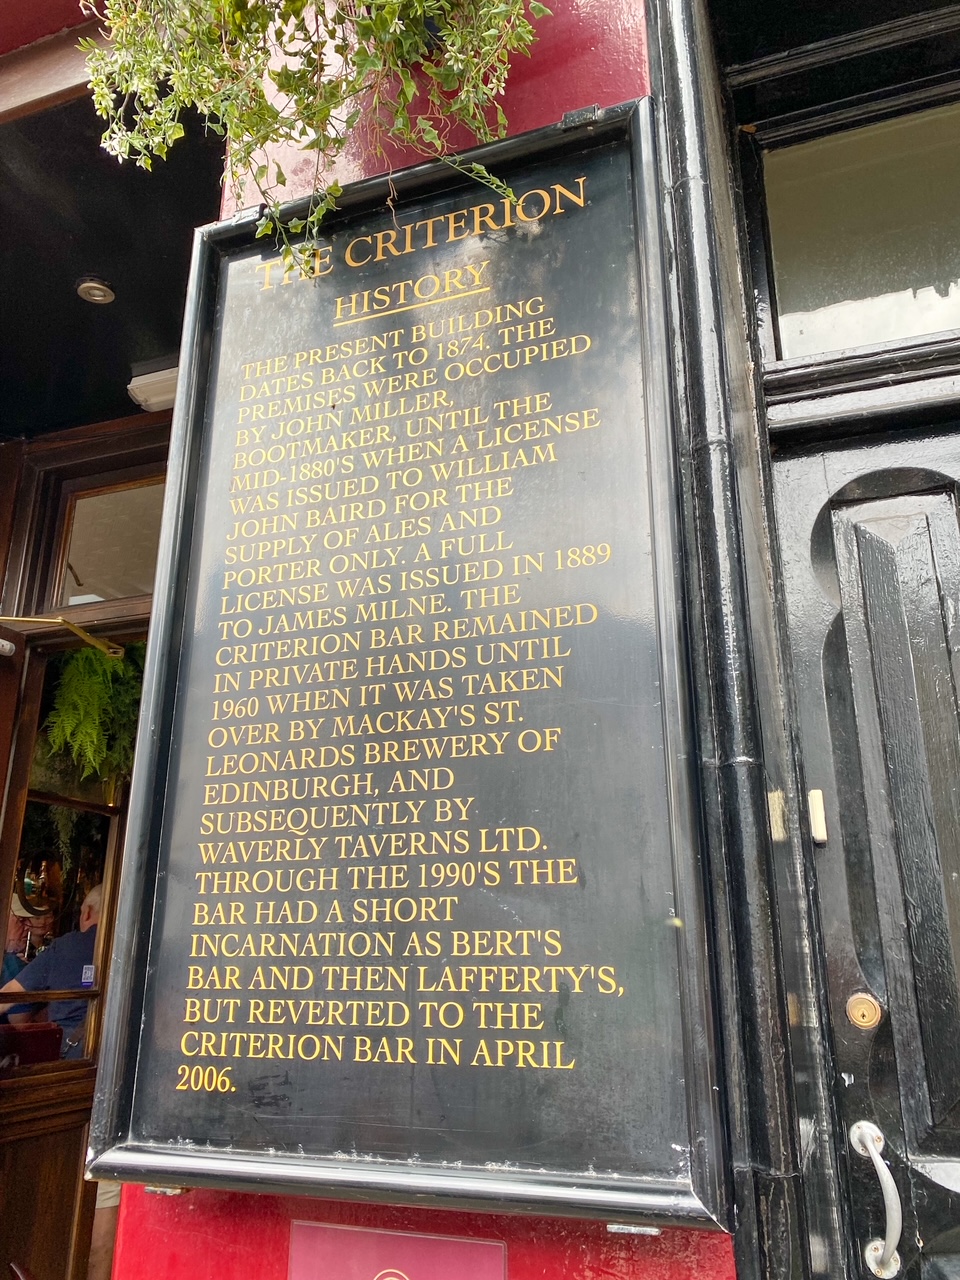 History of The Criterion, an old pub in St Andrews